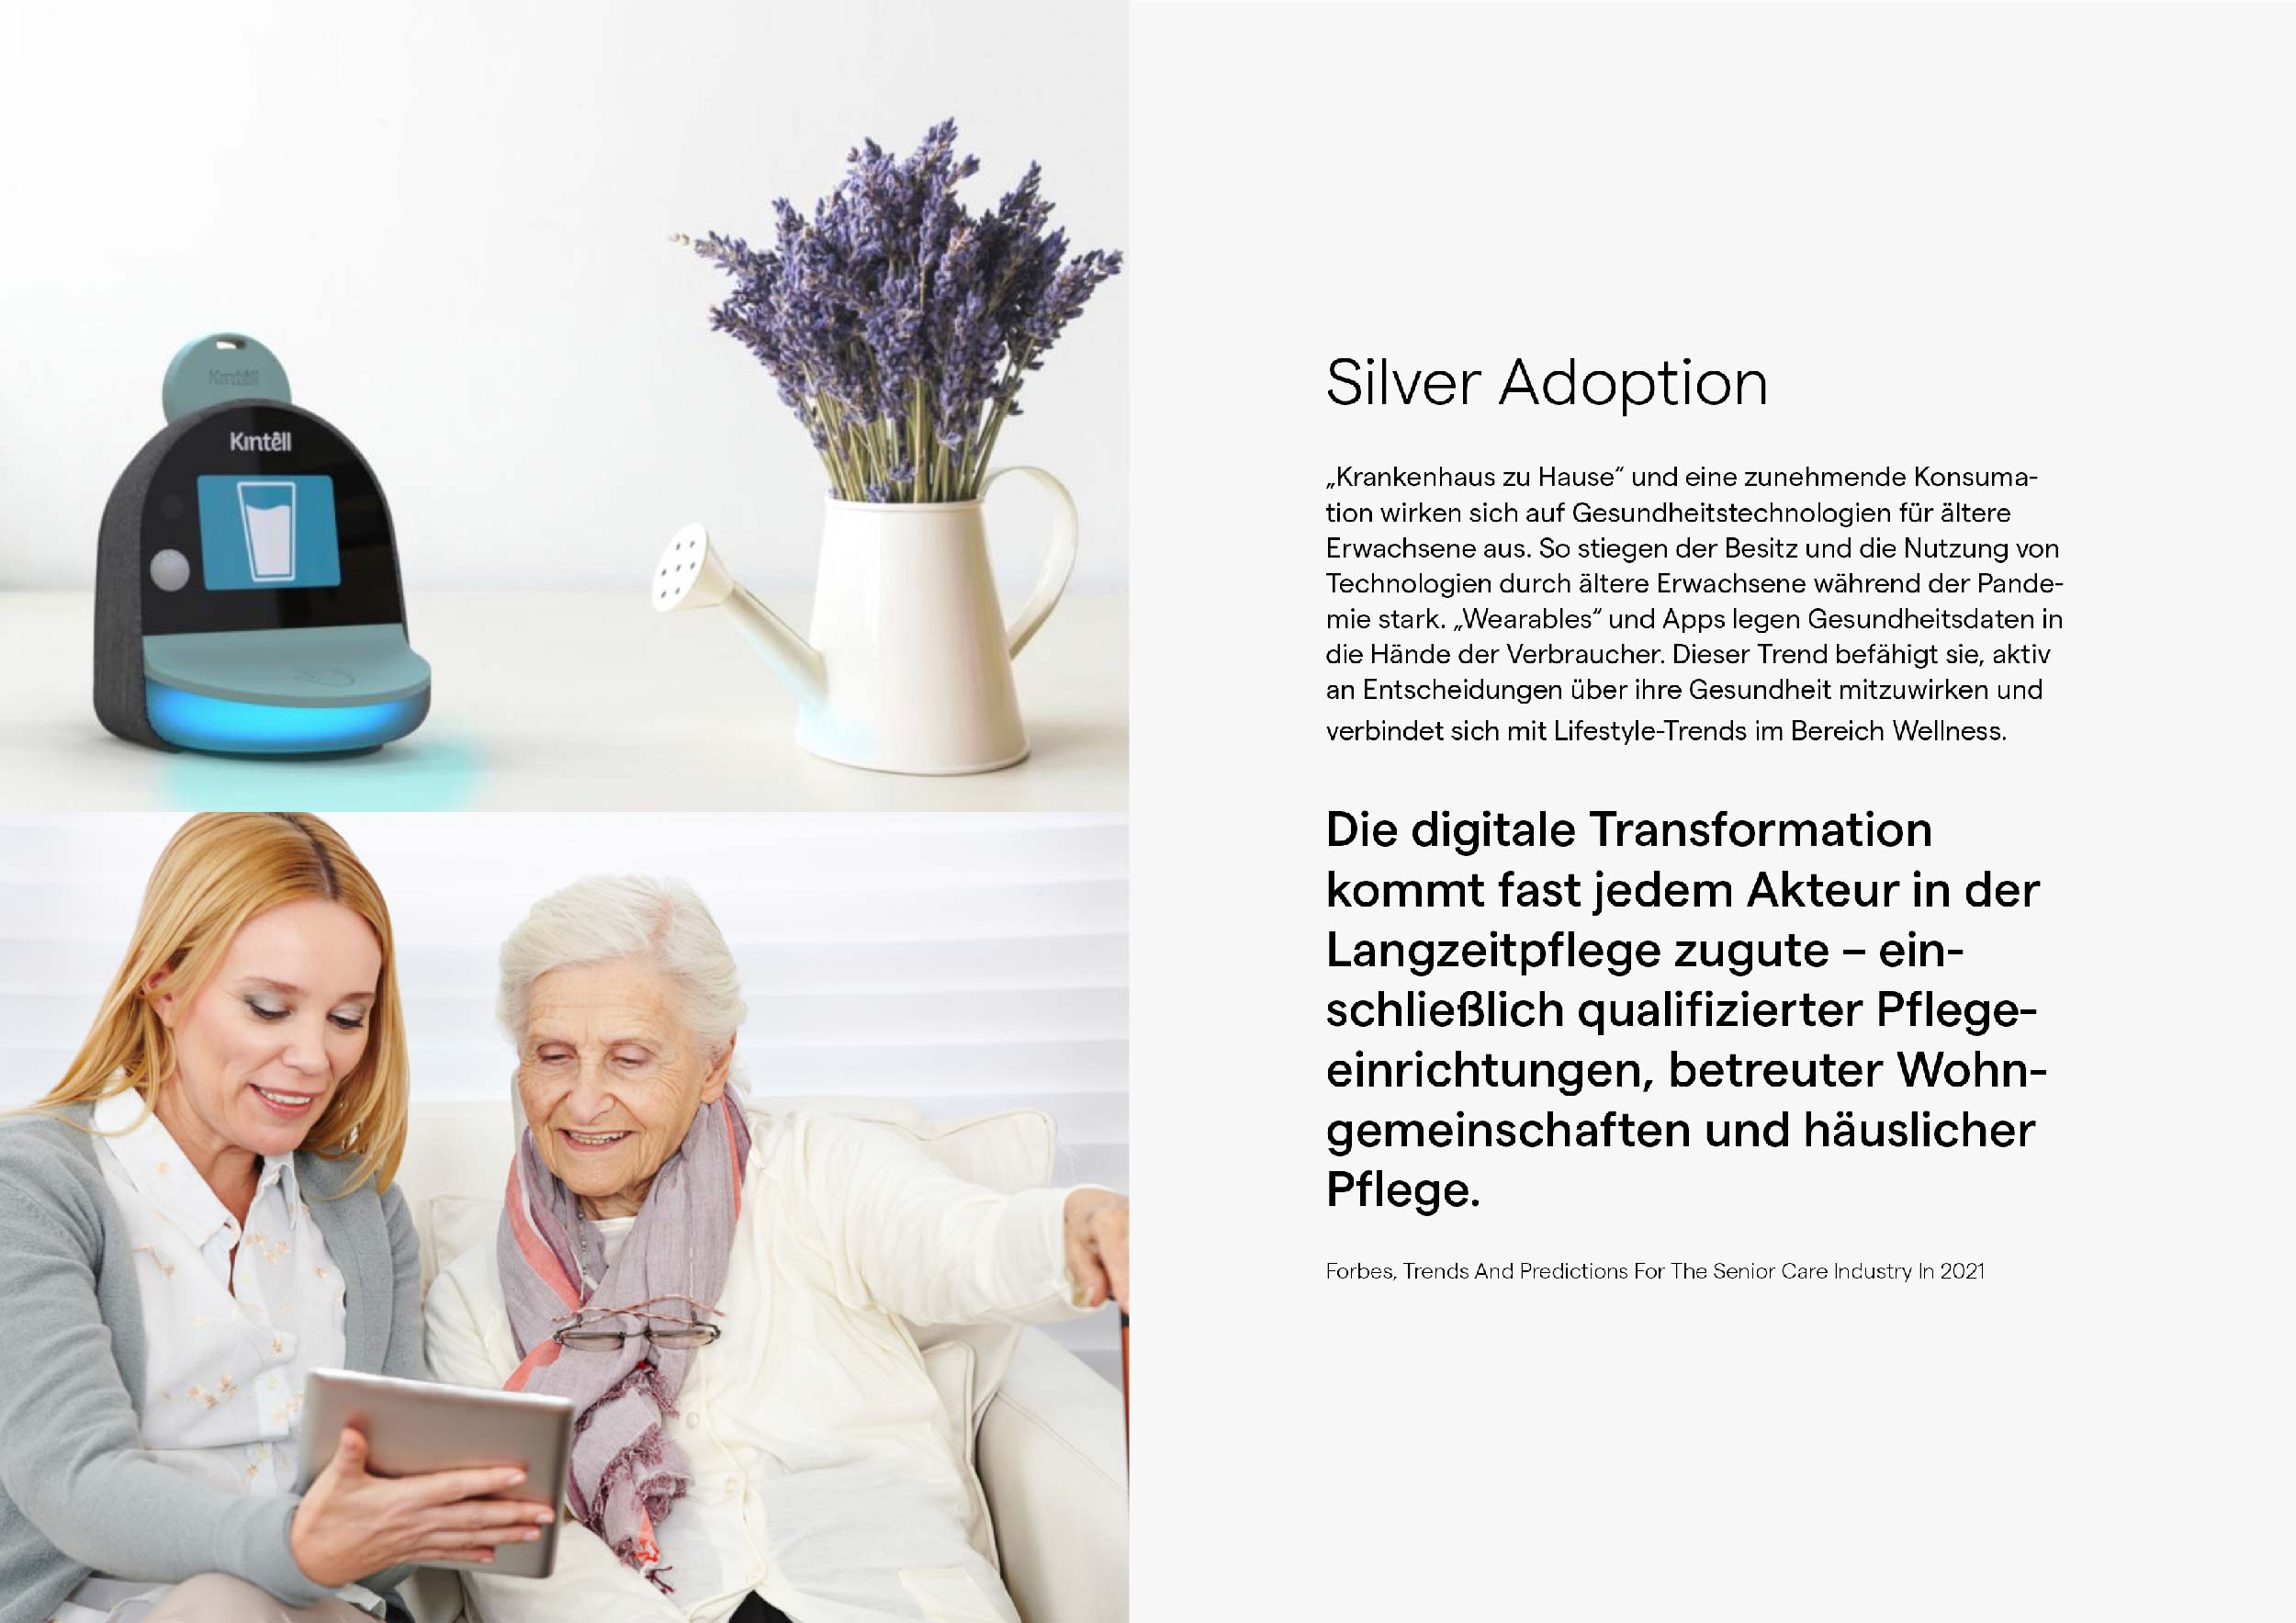 Silver Adoption: "Hospital at home" and increasing consumption are impacting health technologies for older adults.